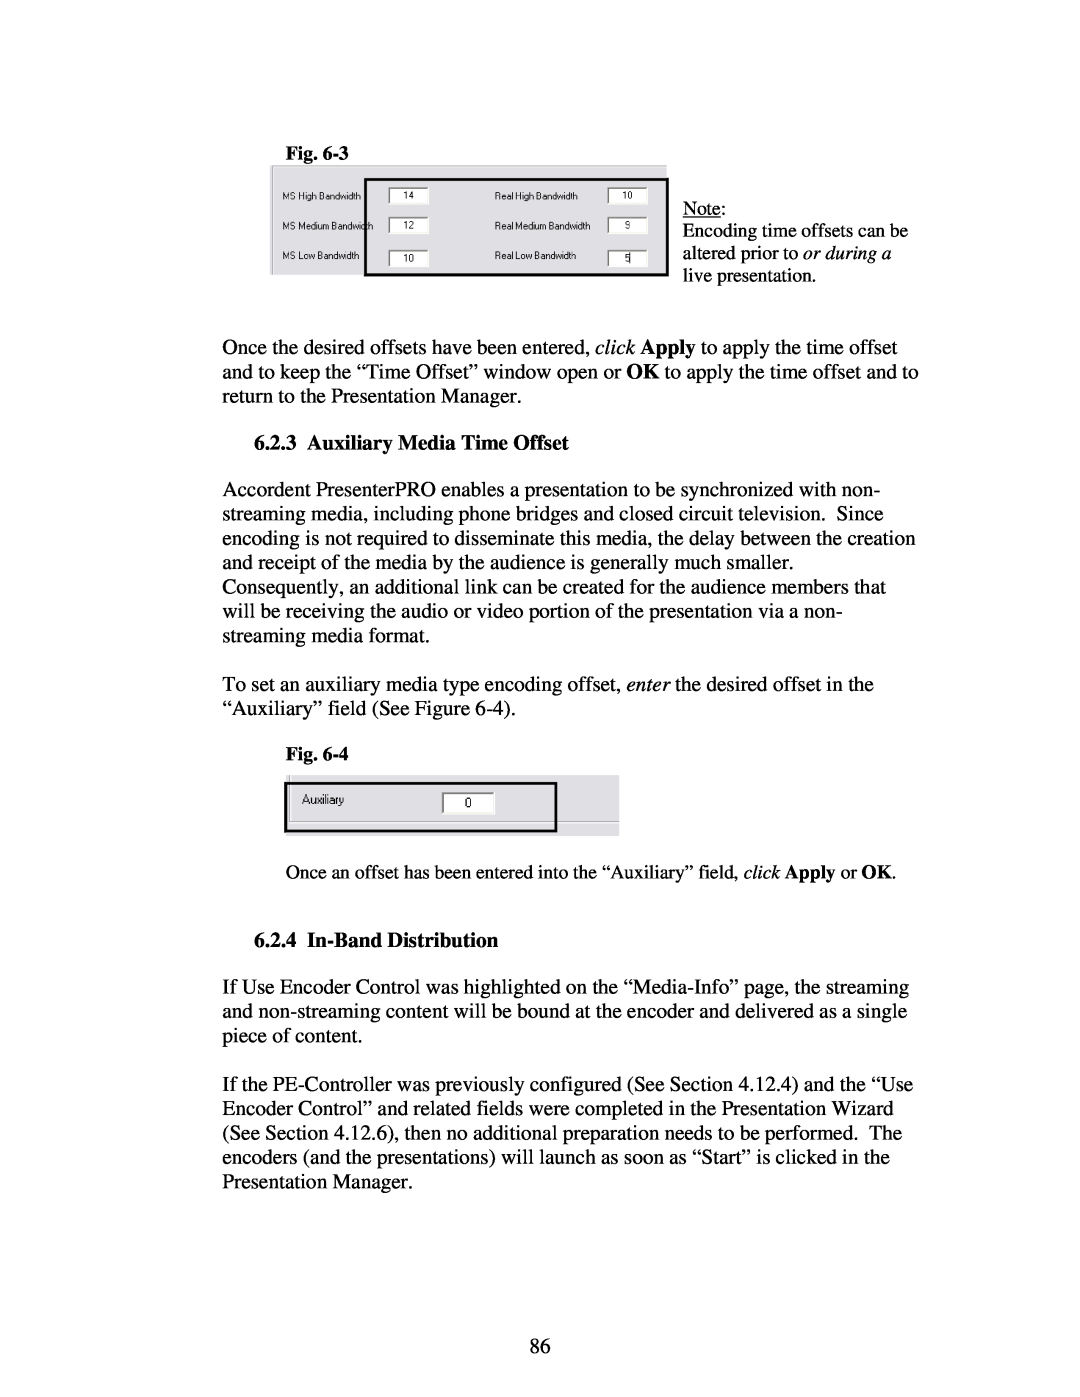 Polycom 6.1 user manual Auxiliary Media Time Offset, In-Band Distribution 